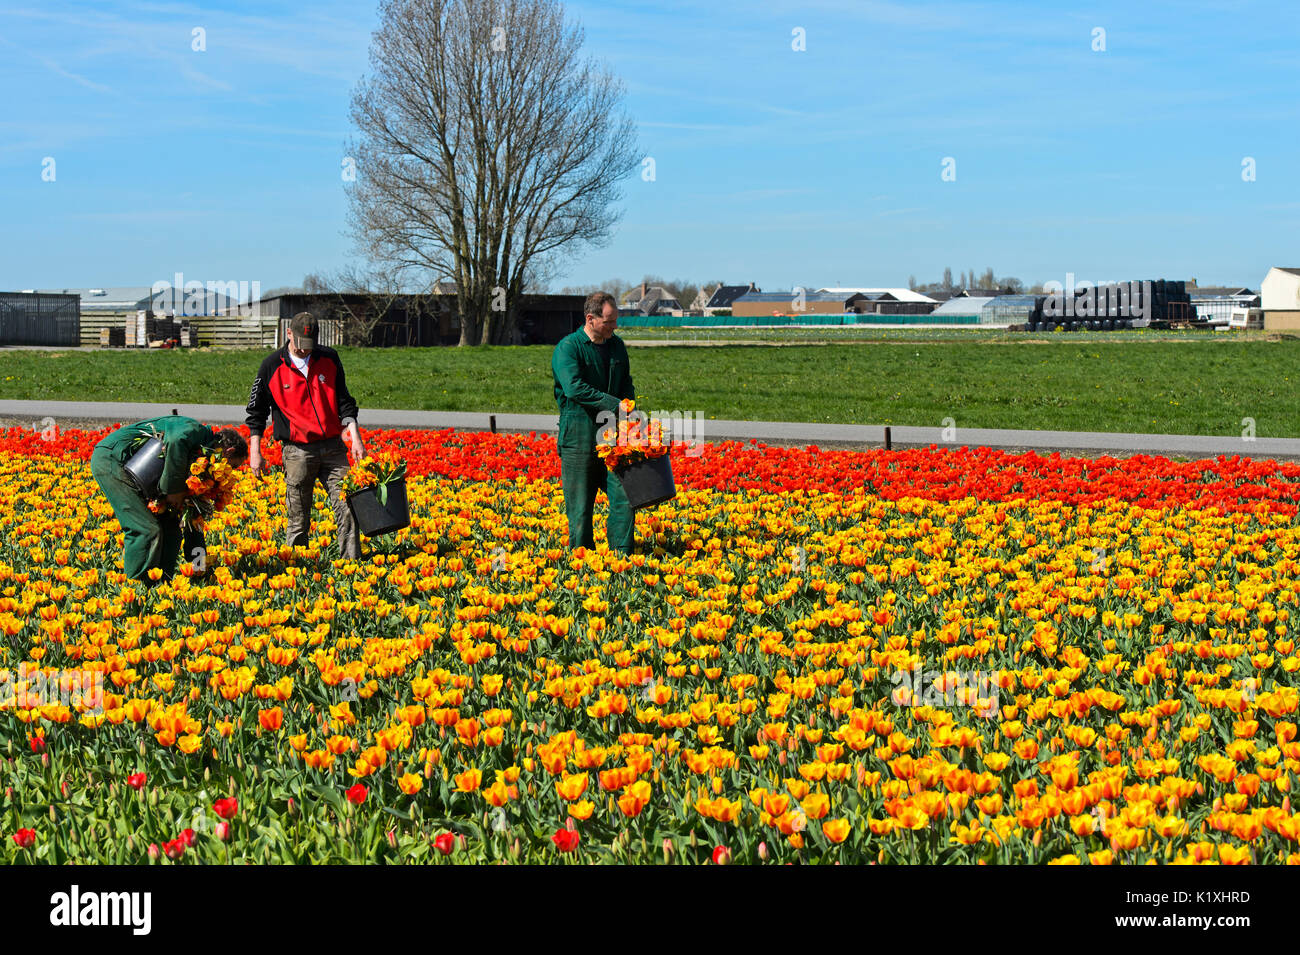 Workers on a field of tulips selecting alien plants to ensure the purity of the tulip plant stock, Voorhout, Bollenstreek region, Netherlands Stock Photo